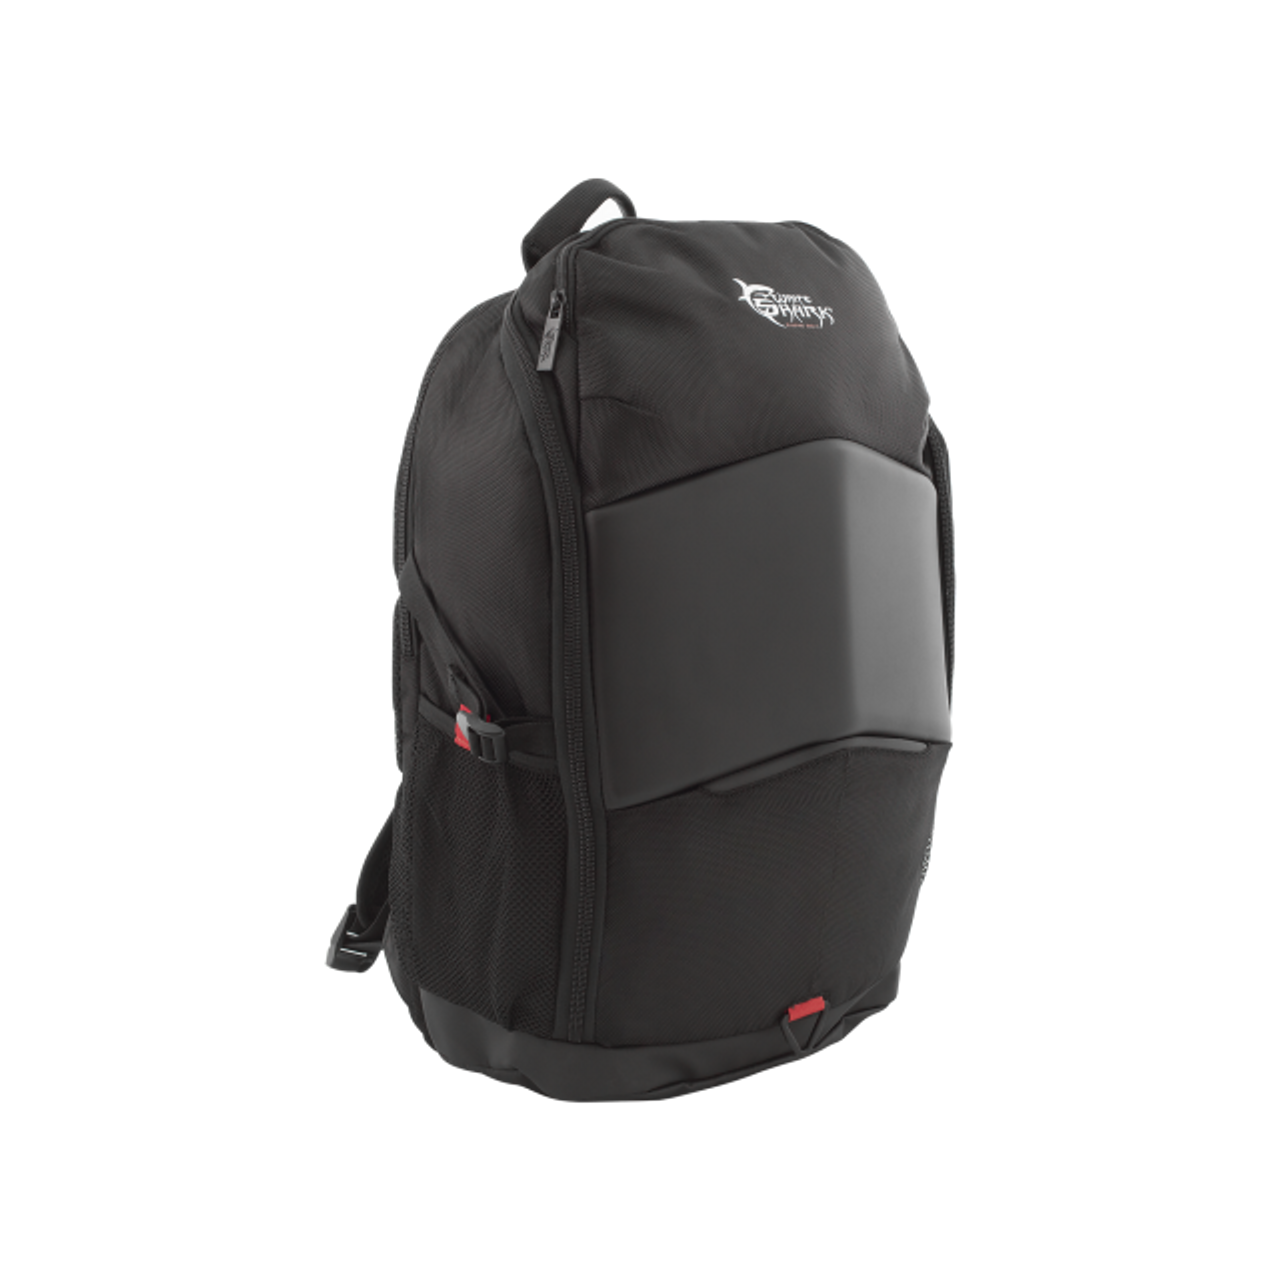 SHIELD White Shark GAMING BACKPACK GBP-003 THE SHIELD